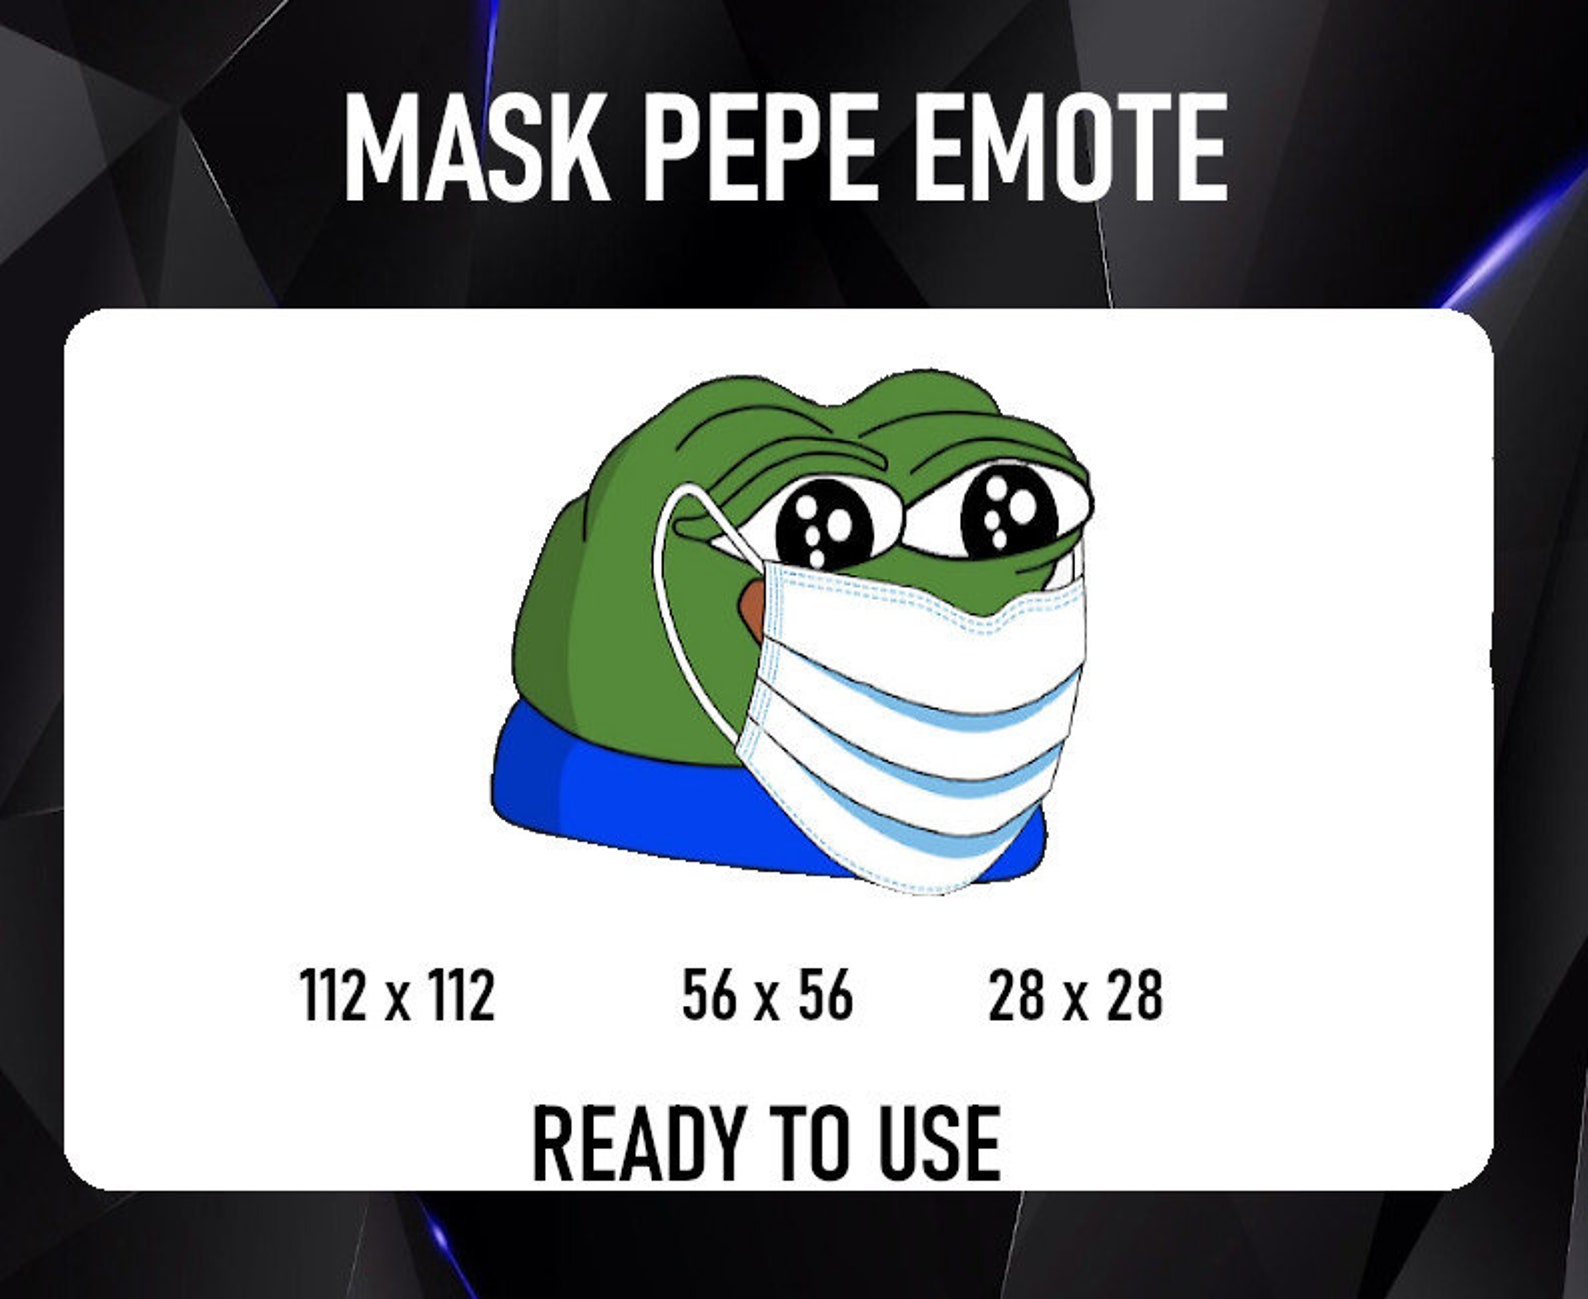 Pepe with Mask emotion. Маска Пепе Блэк раша. Маска Пепе Блэк раша с шапкой. Маска пепе